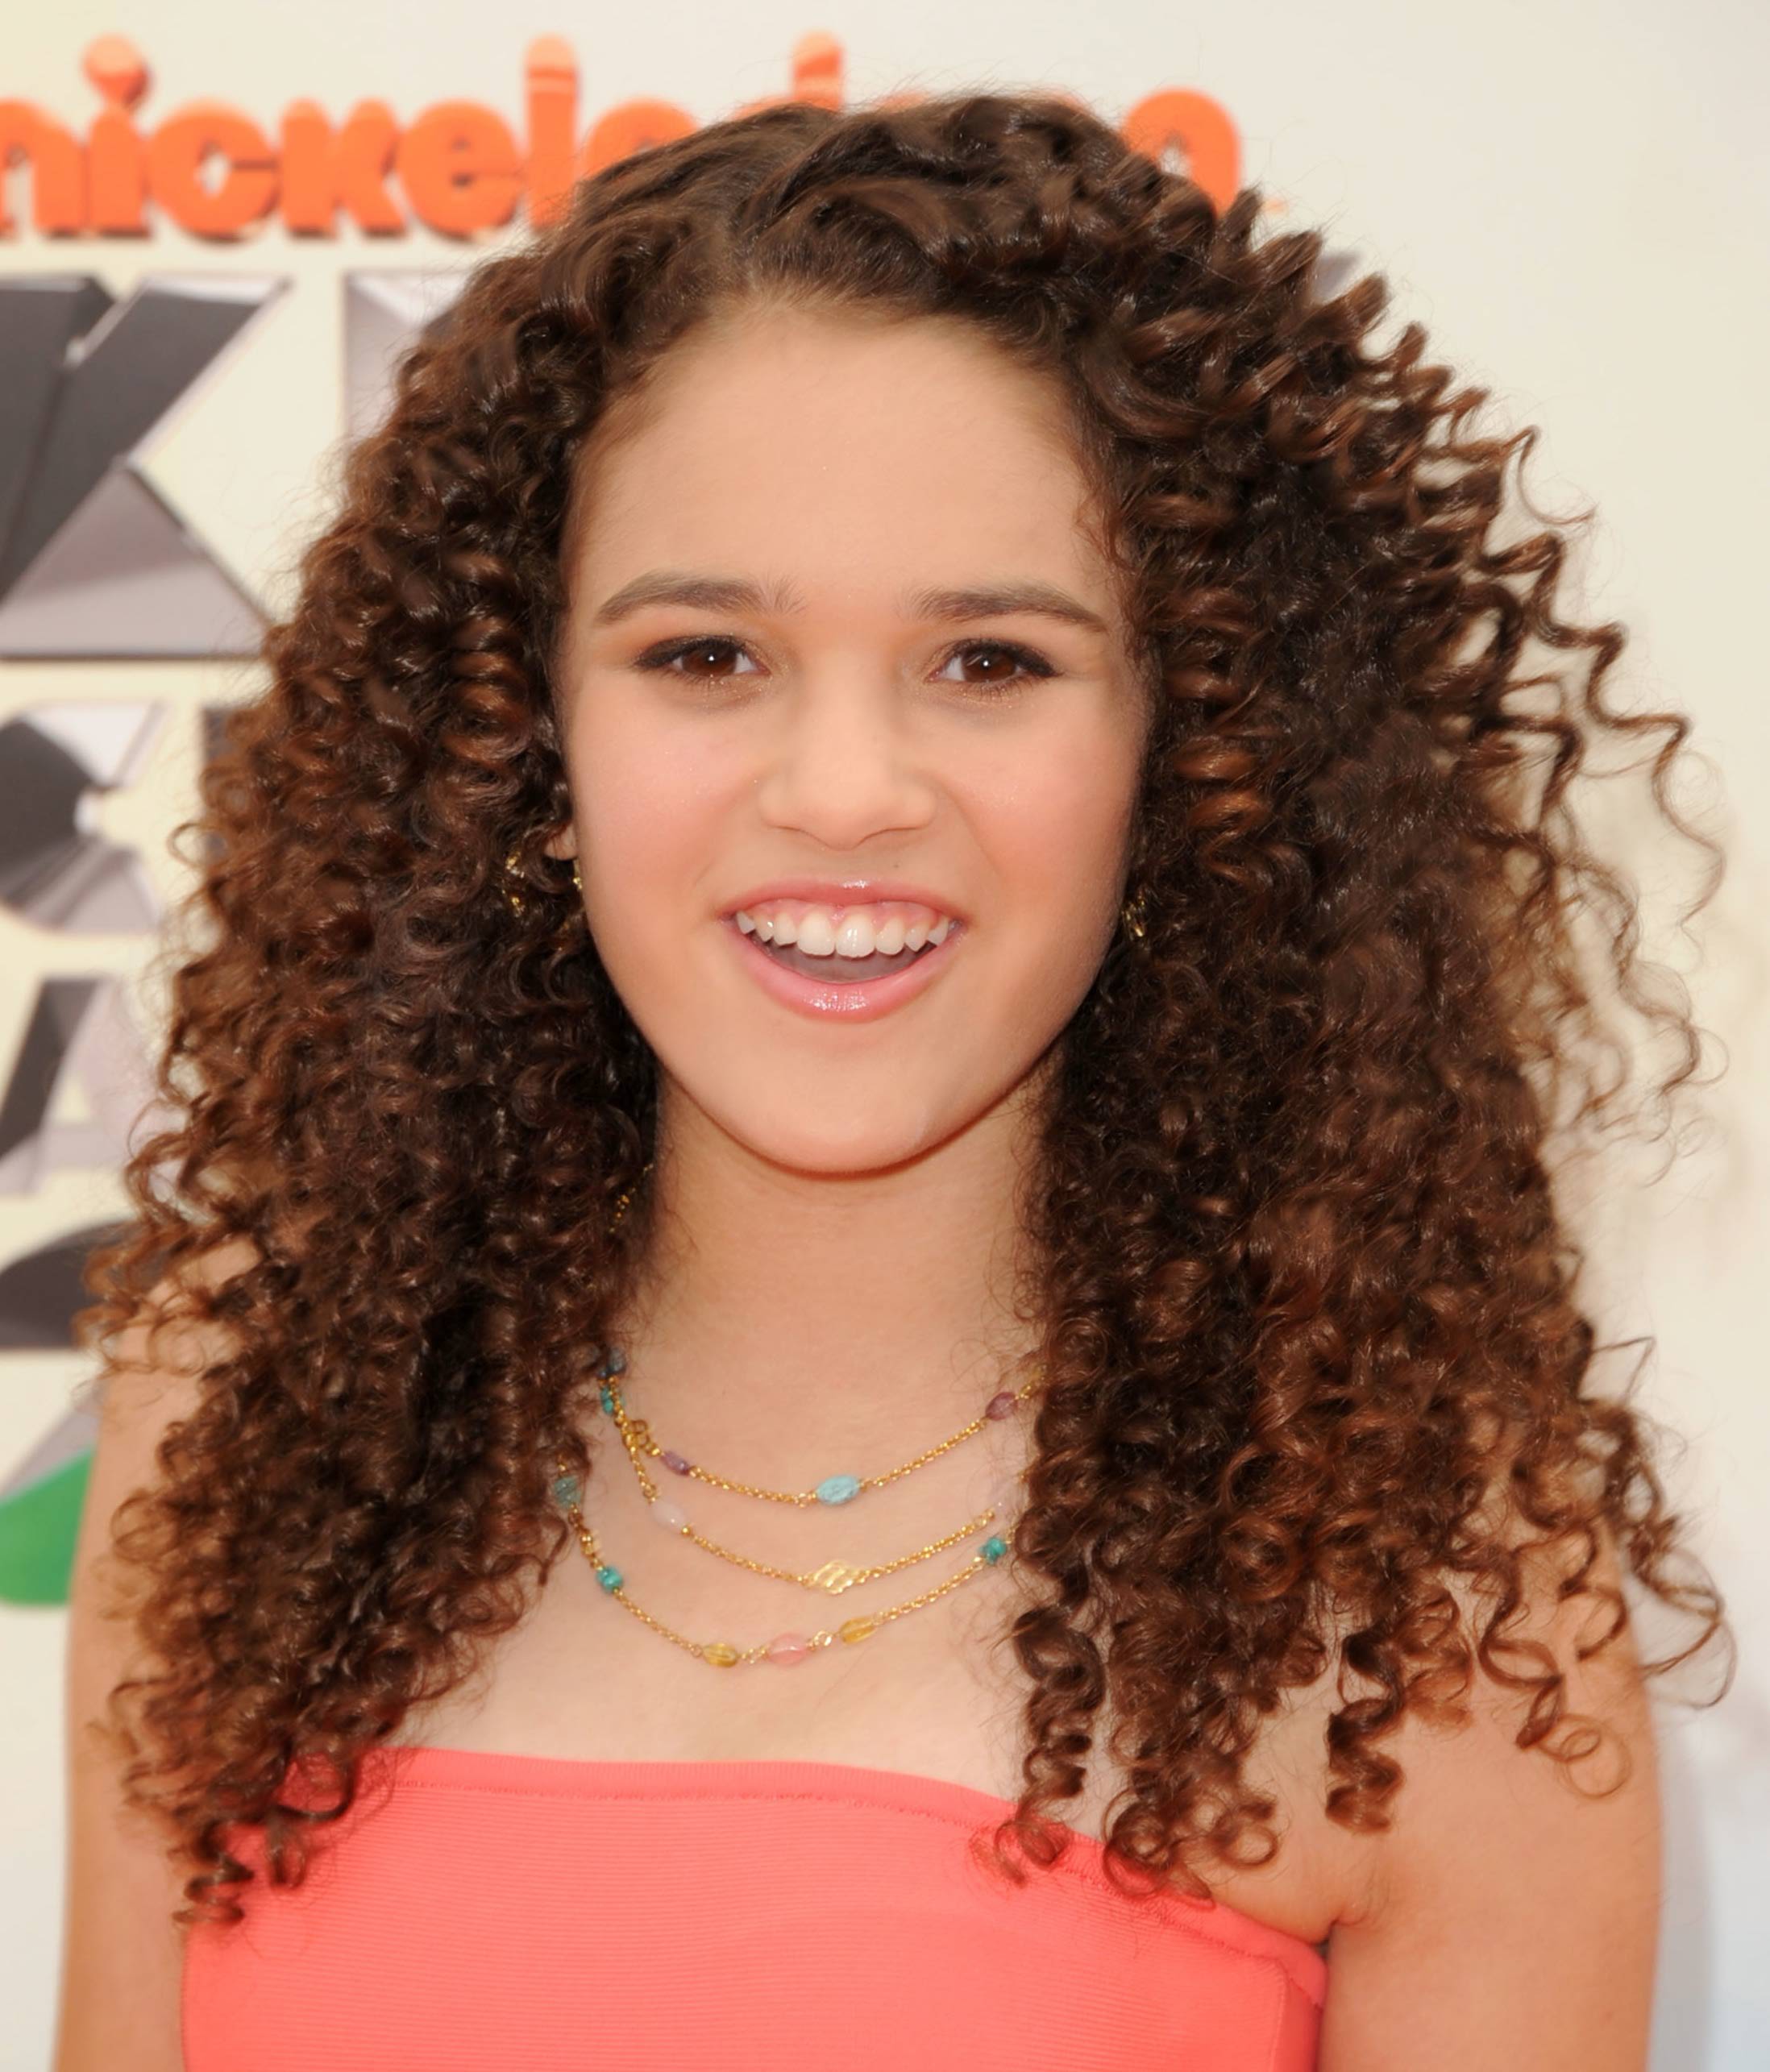 attends Nickelodeon's 25th Annual Kids' Choice Awards  held at Galen Center on March 31, 2012 in Los Angeles, California.